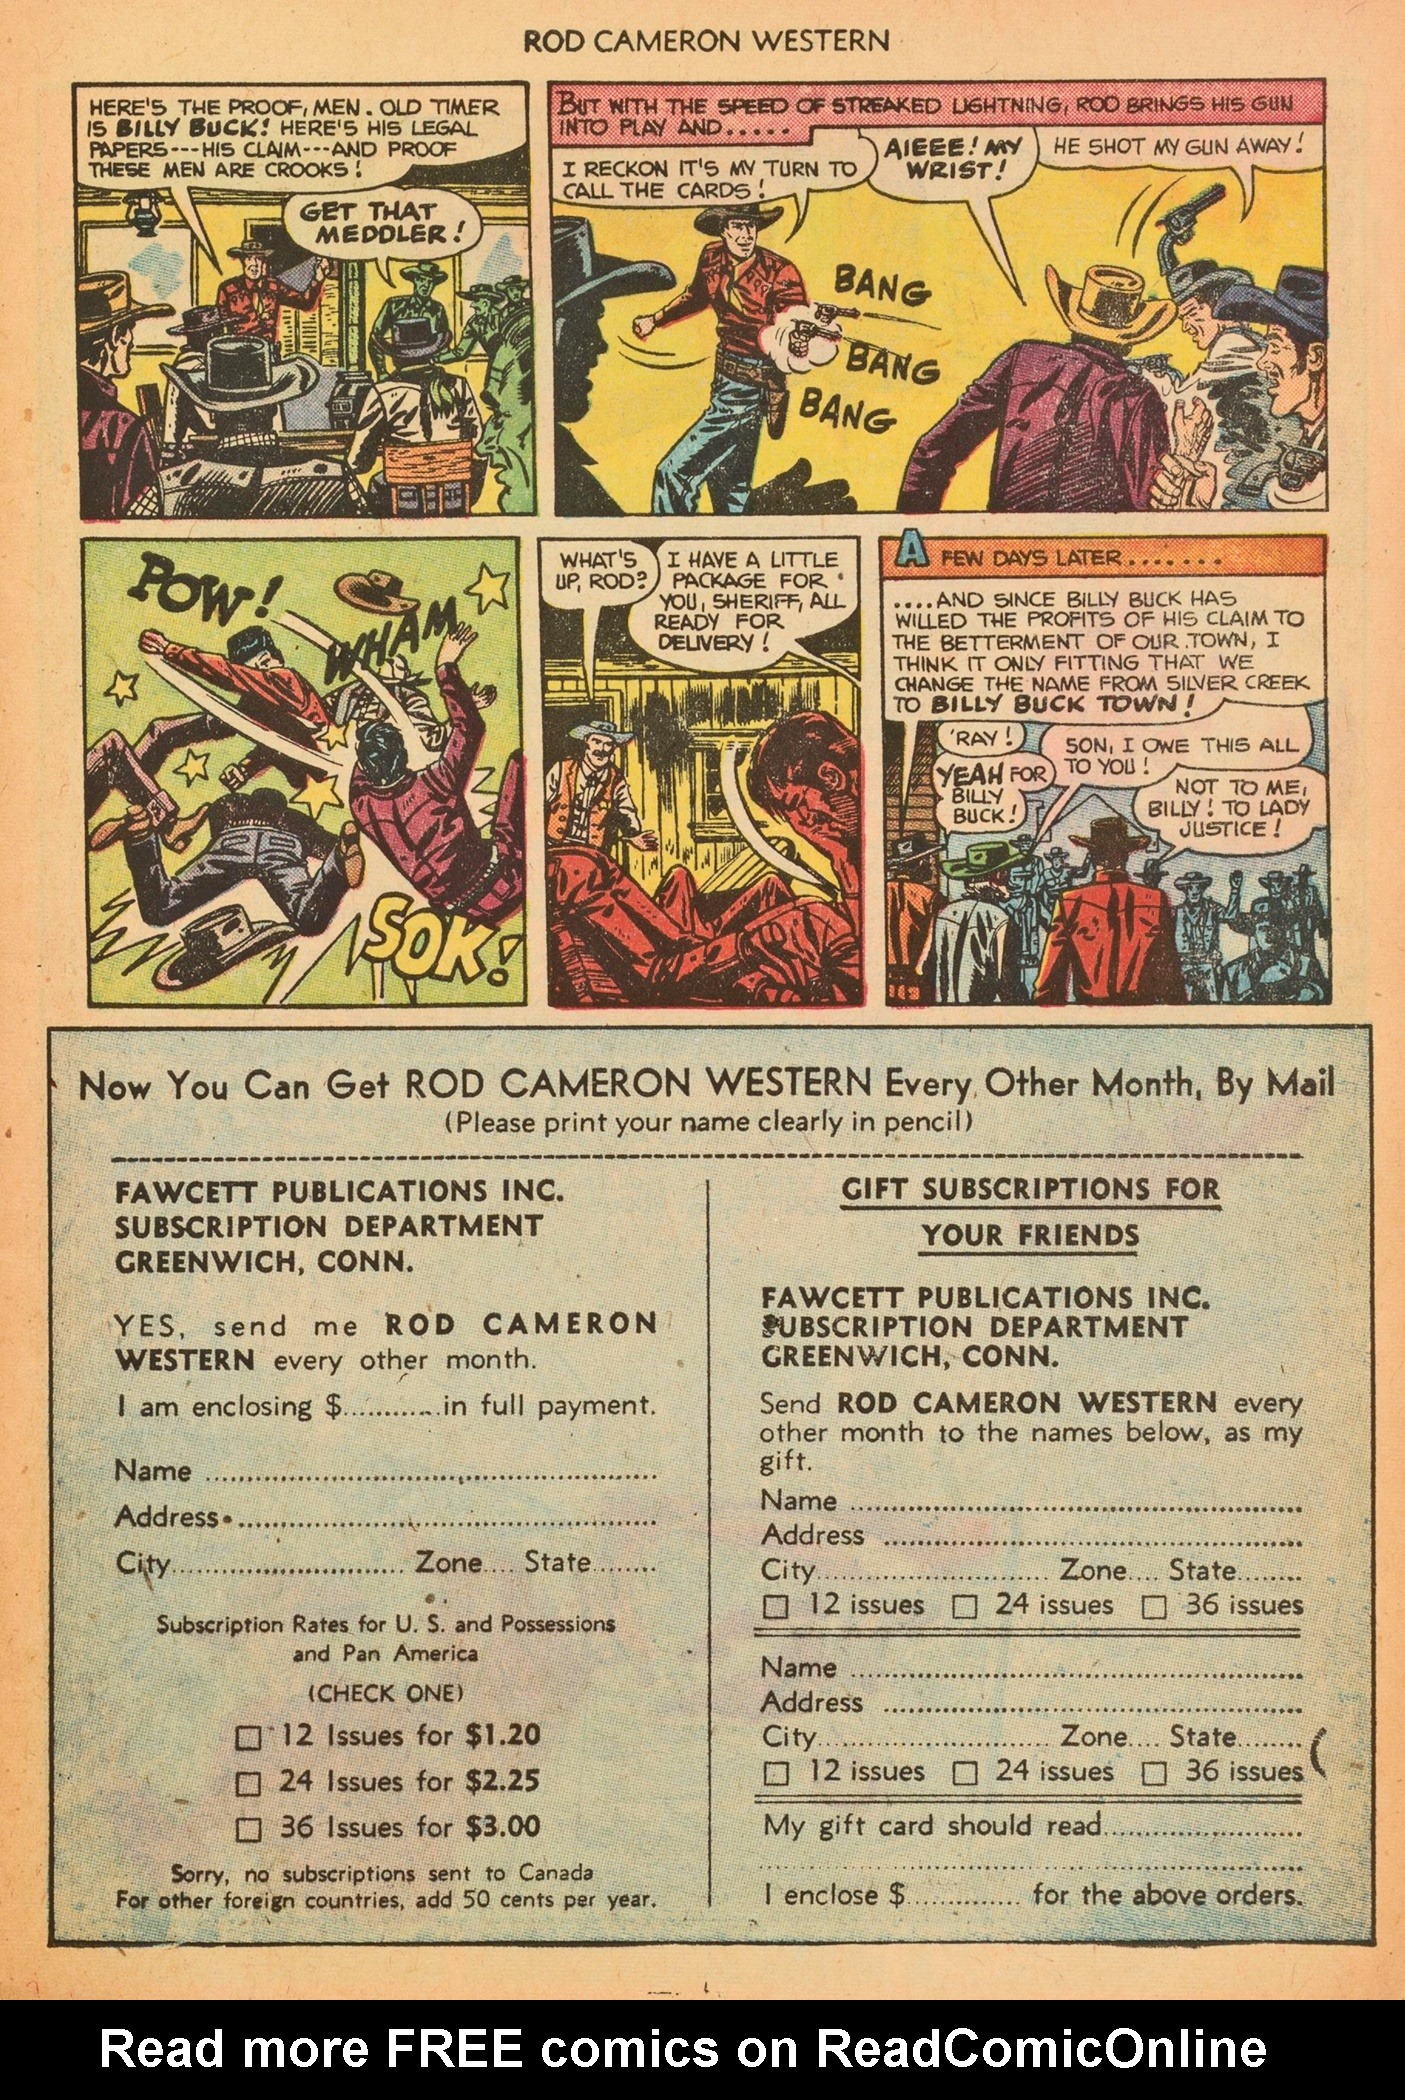 Read online Rod Cameron Western comic -  Issue #15 - 9